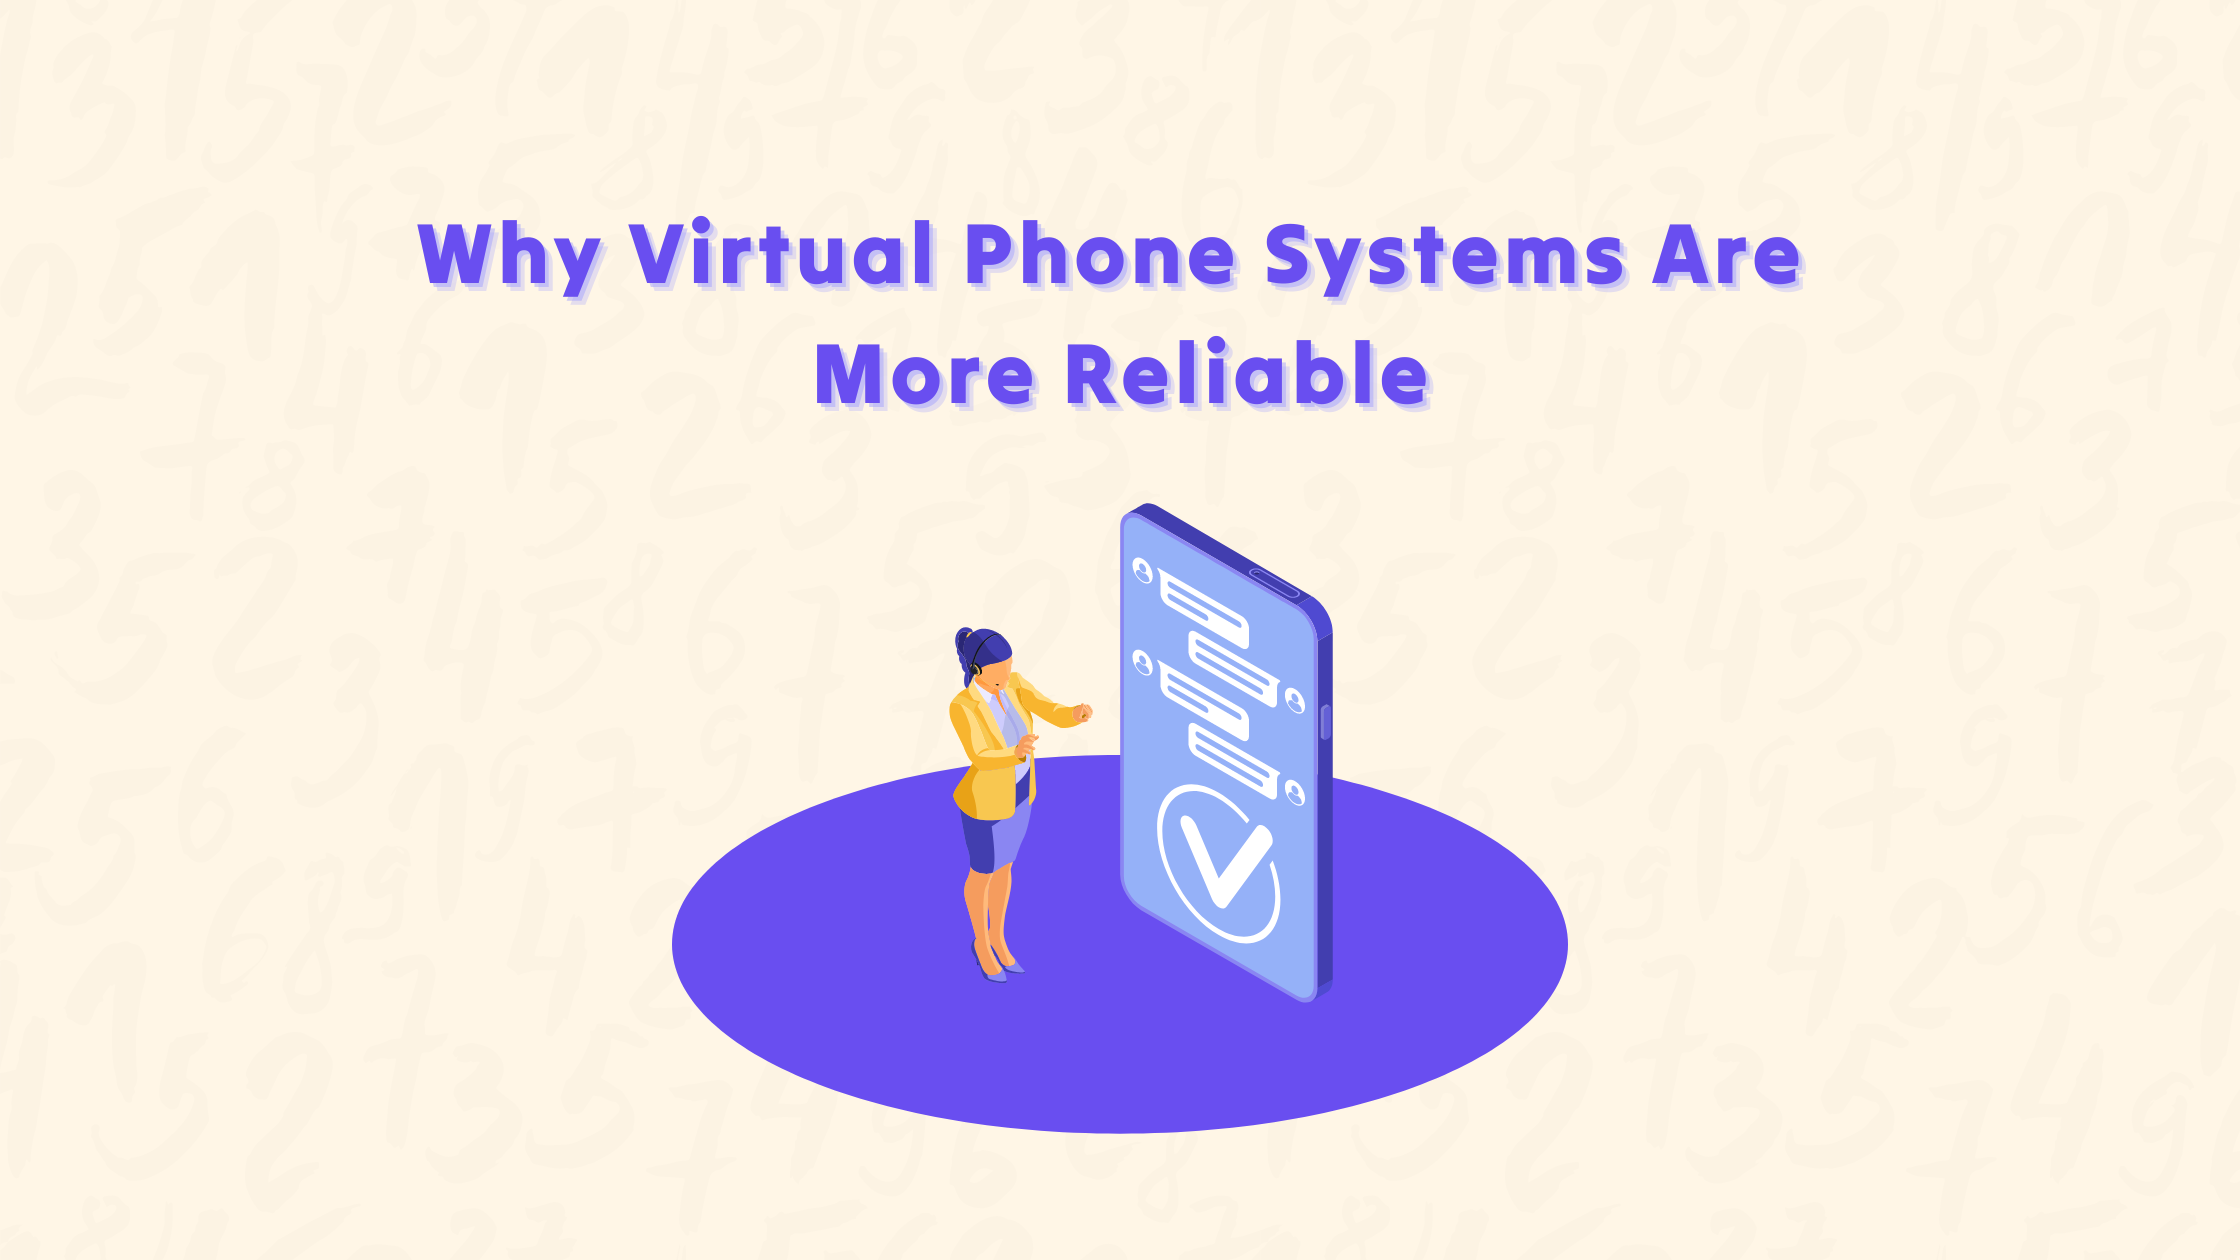 Illustration of a business woman wearing a yellow jacket on the phone and next to her is an illustration of a phone with a text message screen on. Title: Why Virtual Phone Systems Are More Reliable, written in purple.